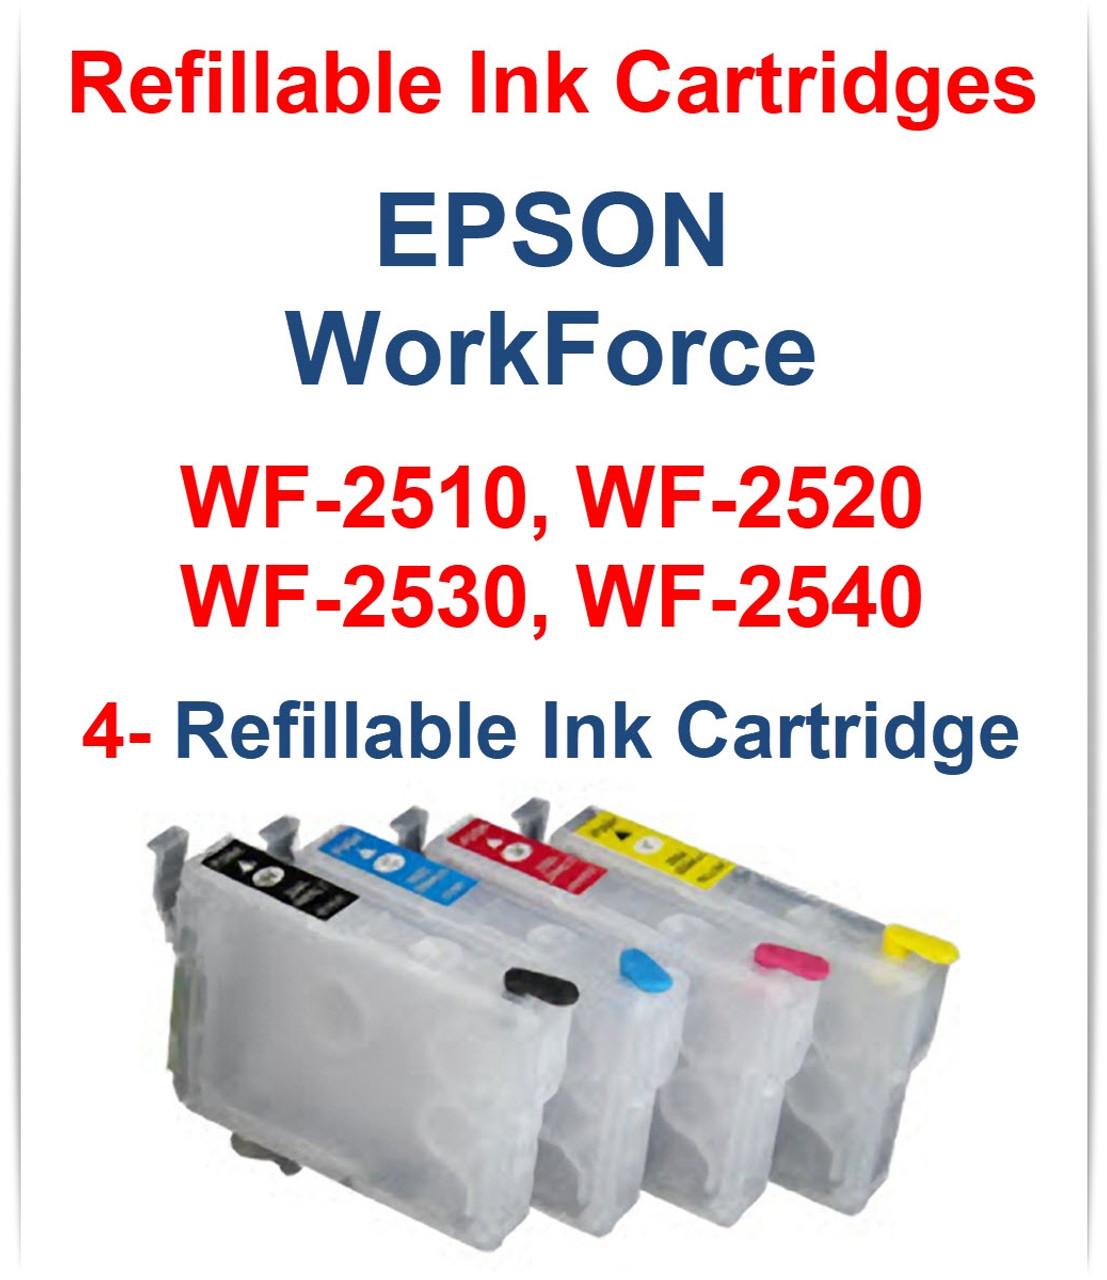 4- Refillable Ink Cartridges for Epson WorkForce WF-2510 WF-2520 WF-2530 WF-2540 printers
Cartridges included: T200120, T200200, T200320, T200420